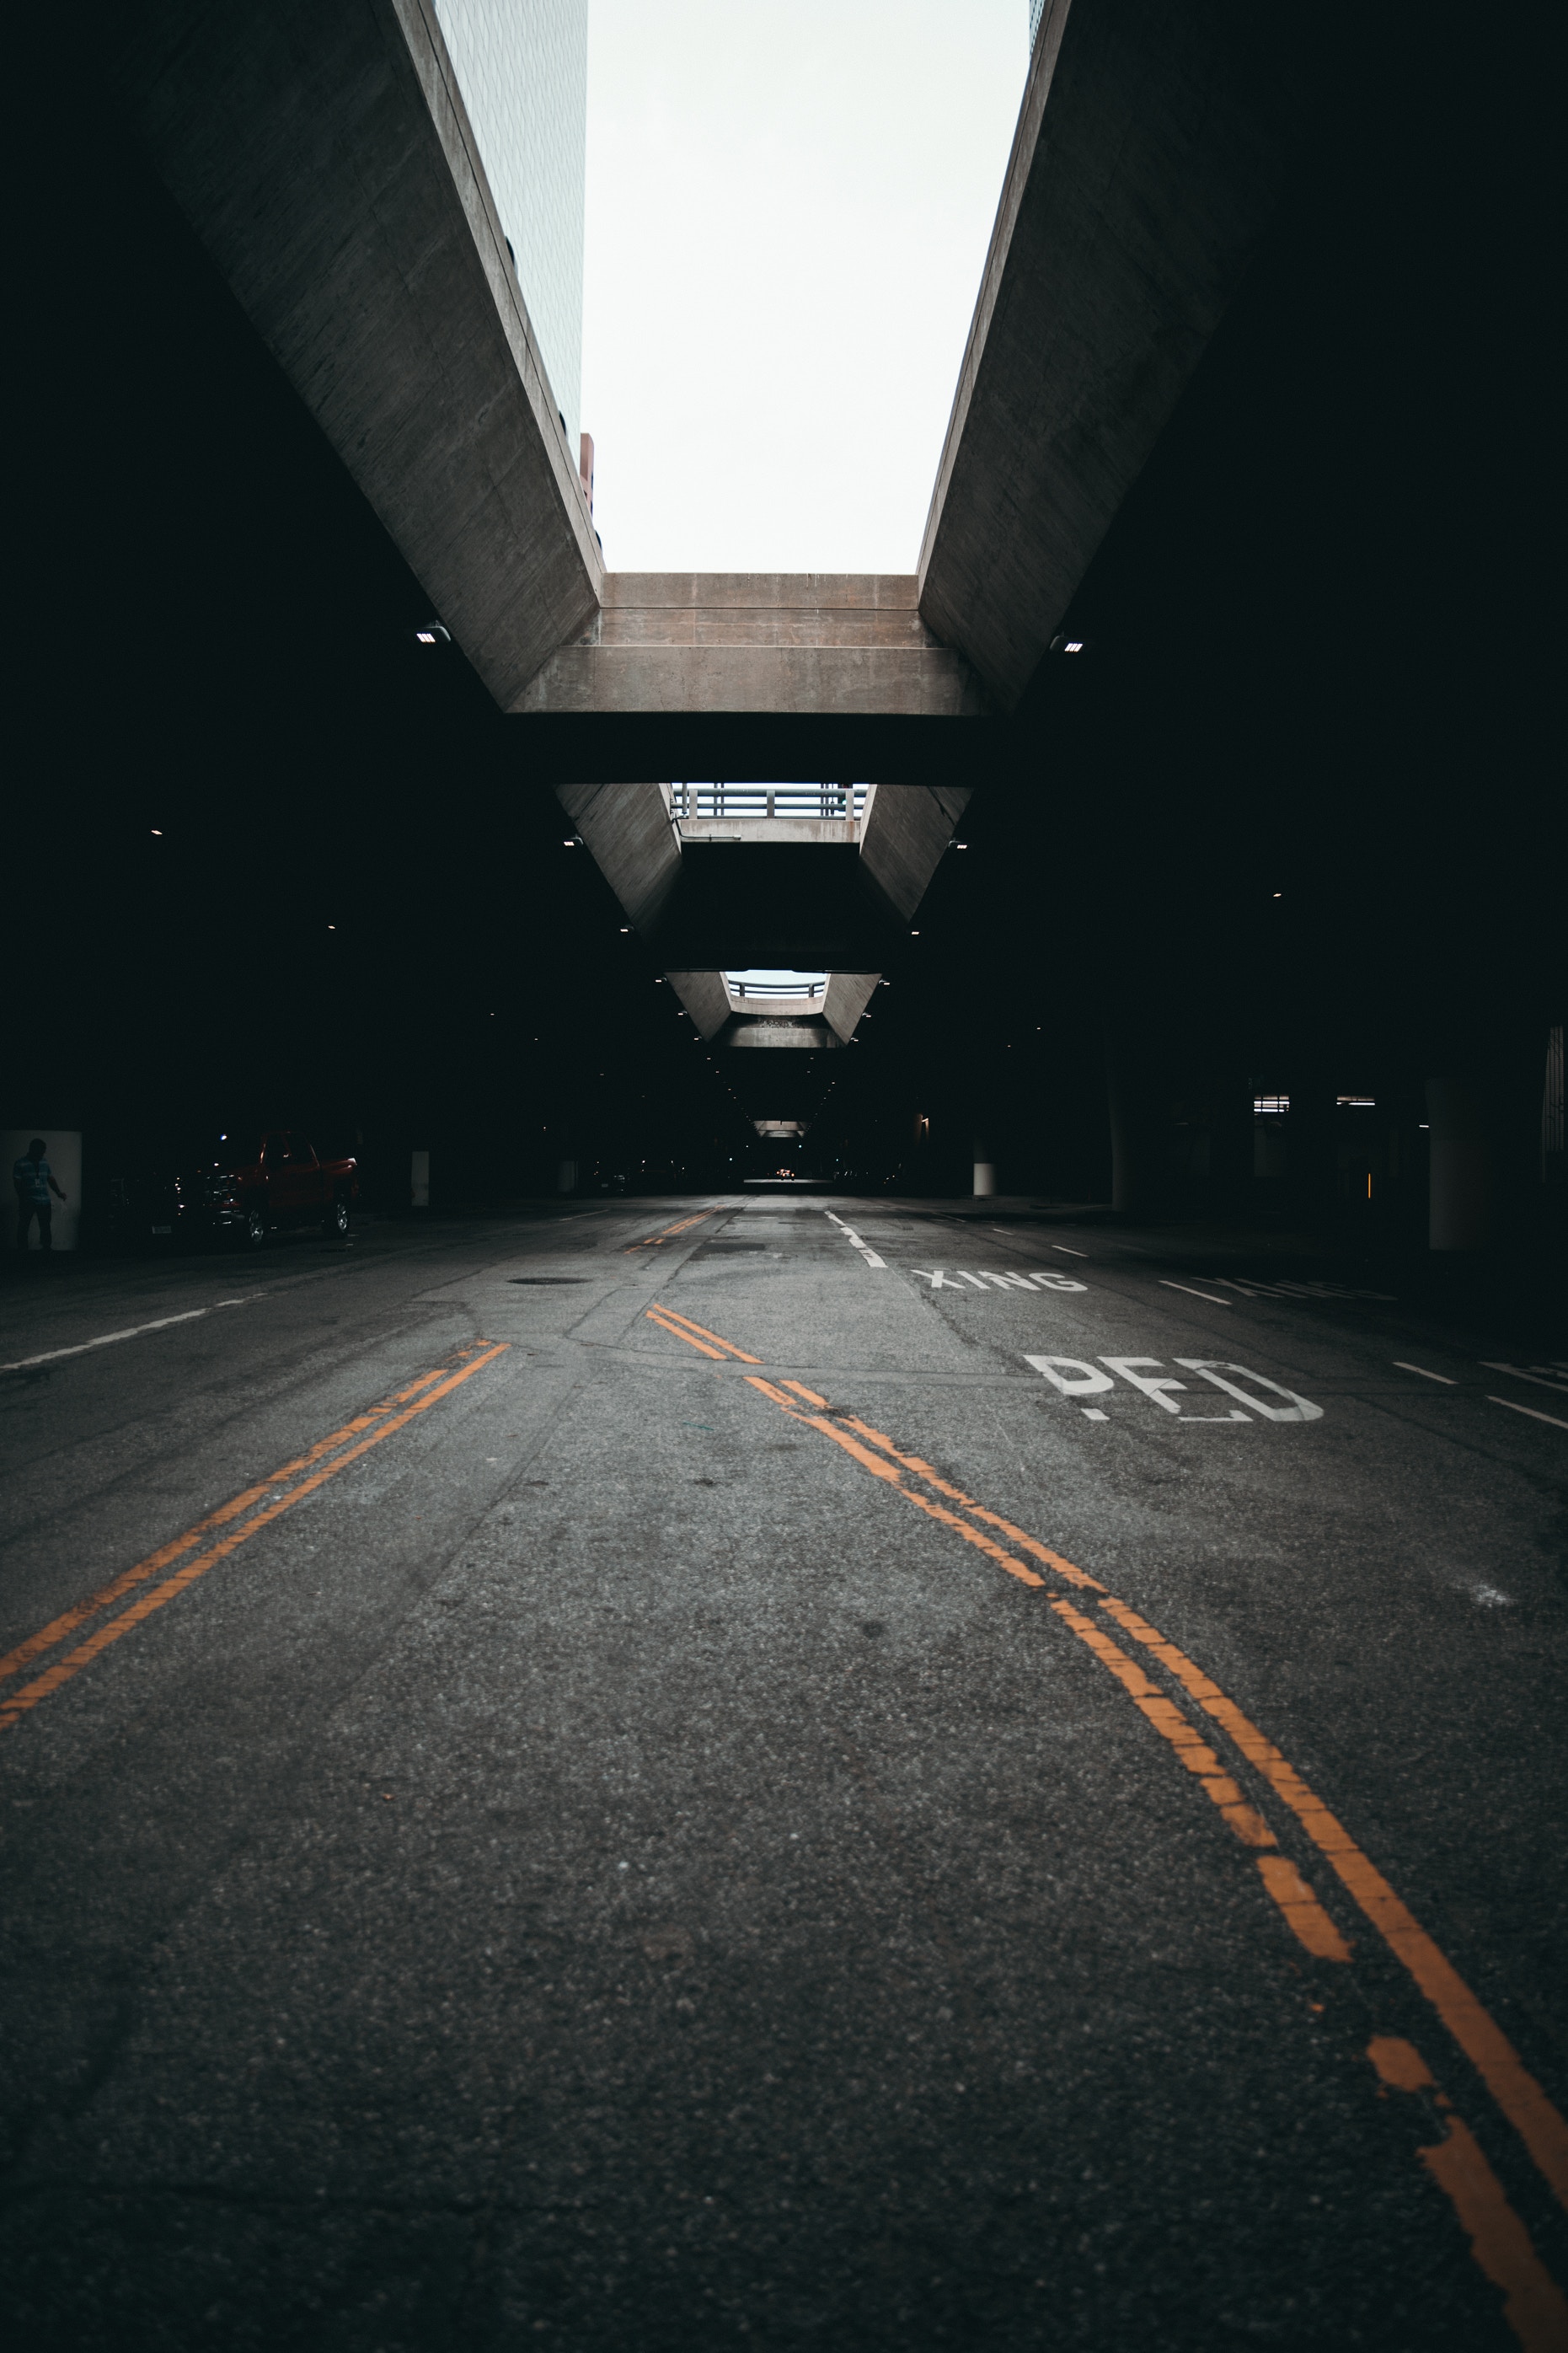 asphalt, cities, architecture, design, construction, parking, road markings, shed, canopy 1080p